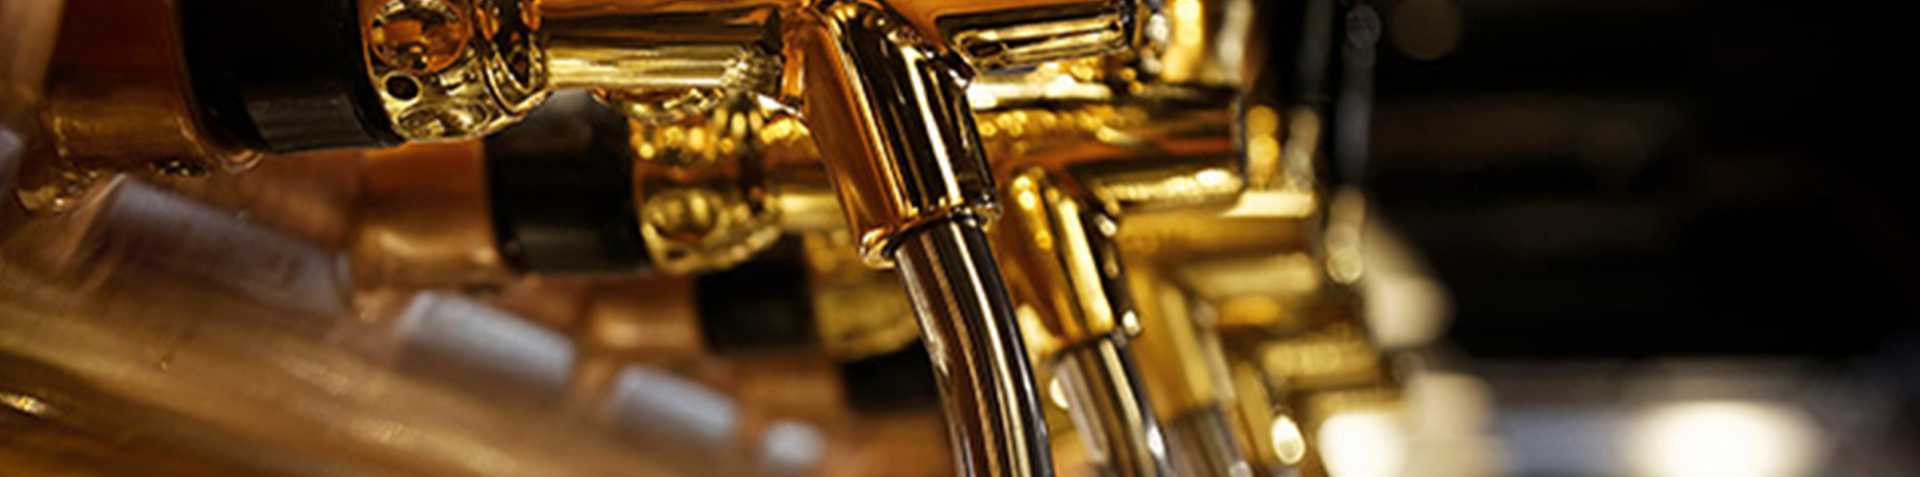 BEER-TAPS-OUR-STORY-SCOTCH-HILL